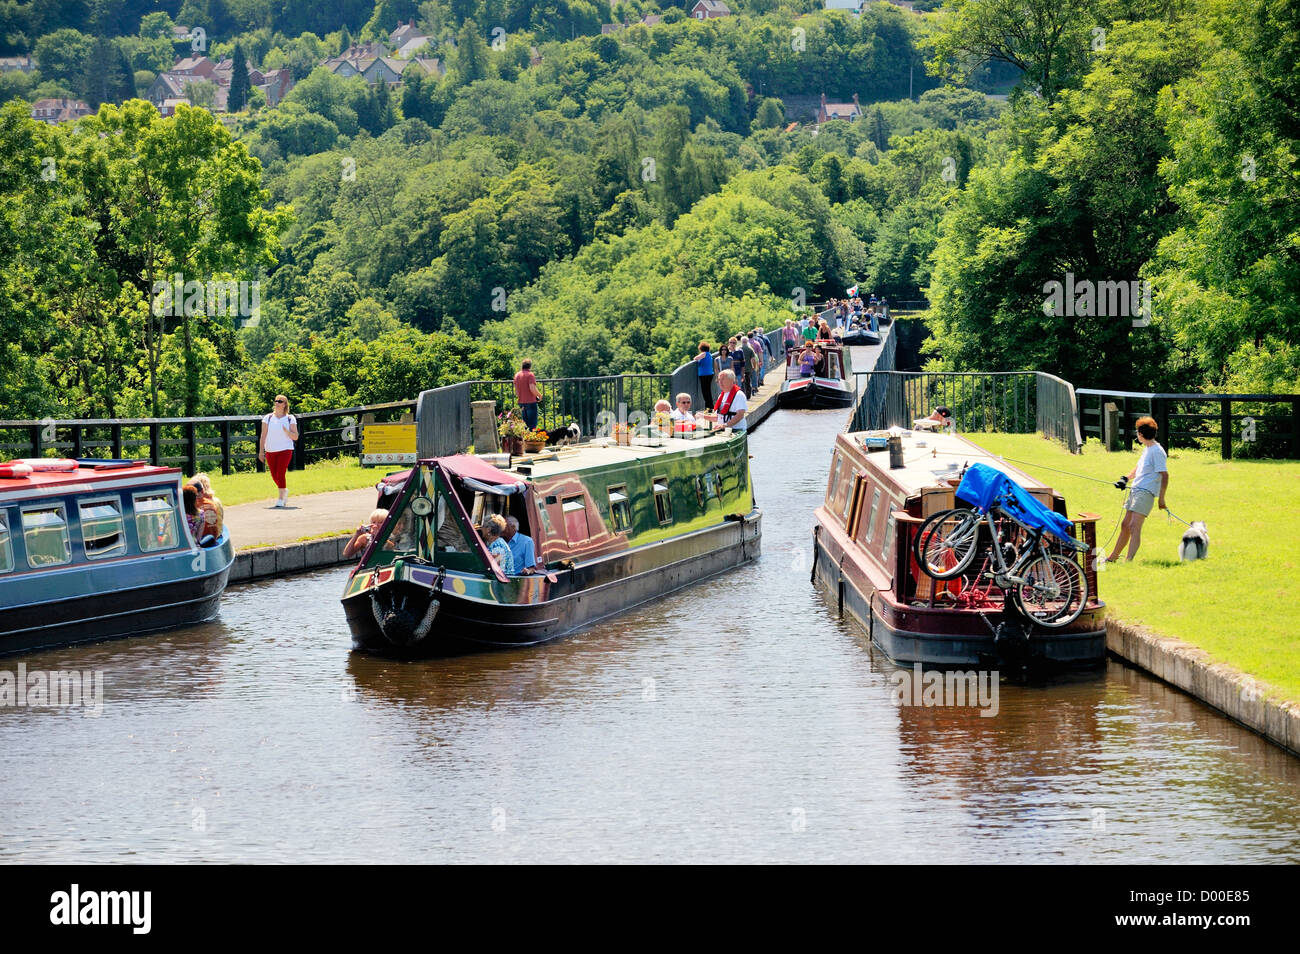 Pontcysyllte Aqueduct finished 1805 carries canal boats on Llangollen Canal over the River Dee valley near Wrexham, Wales, UK Stock Photo